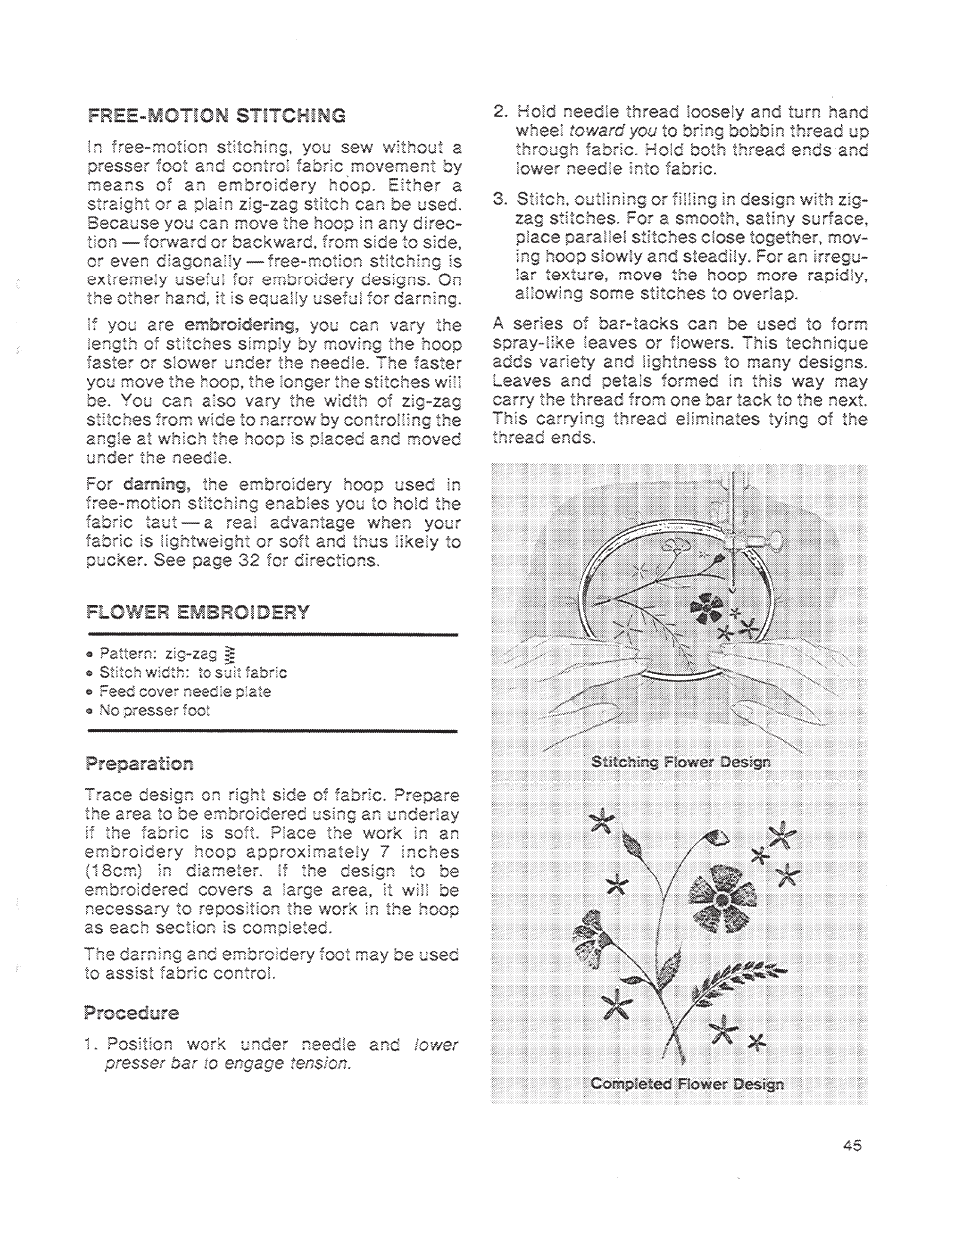 Flower elibroioery | SINGER 1200 Athena User Manual | Page 47 / 90